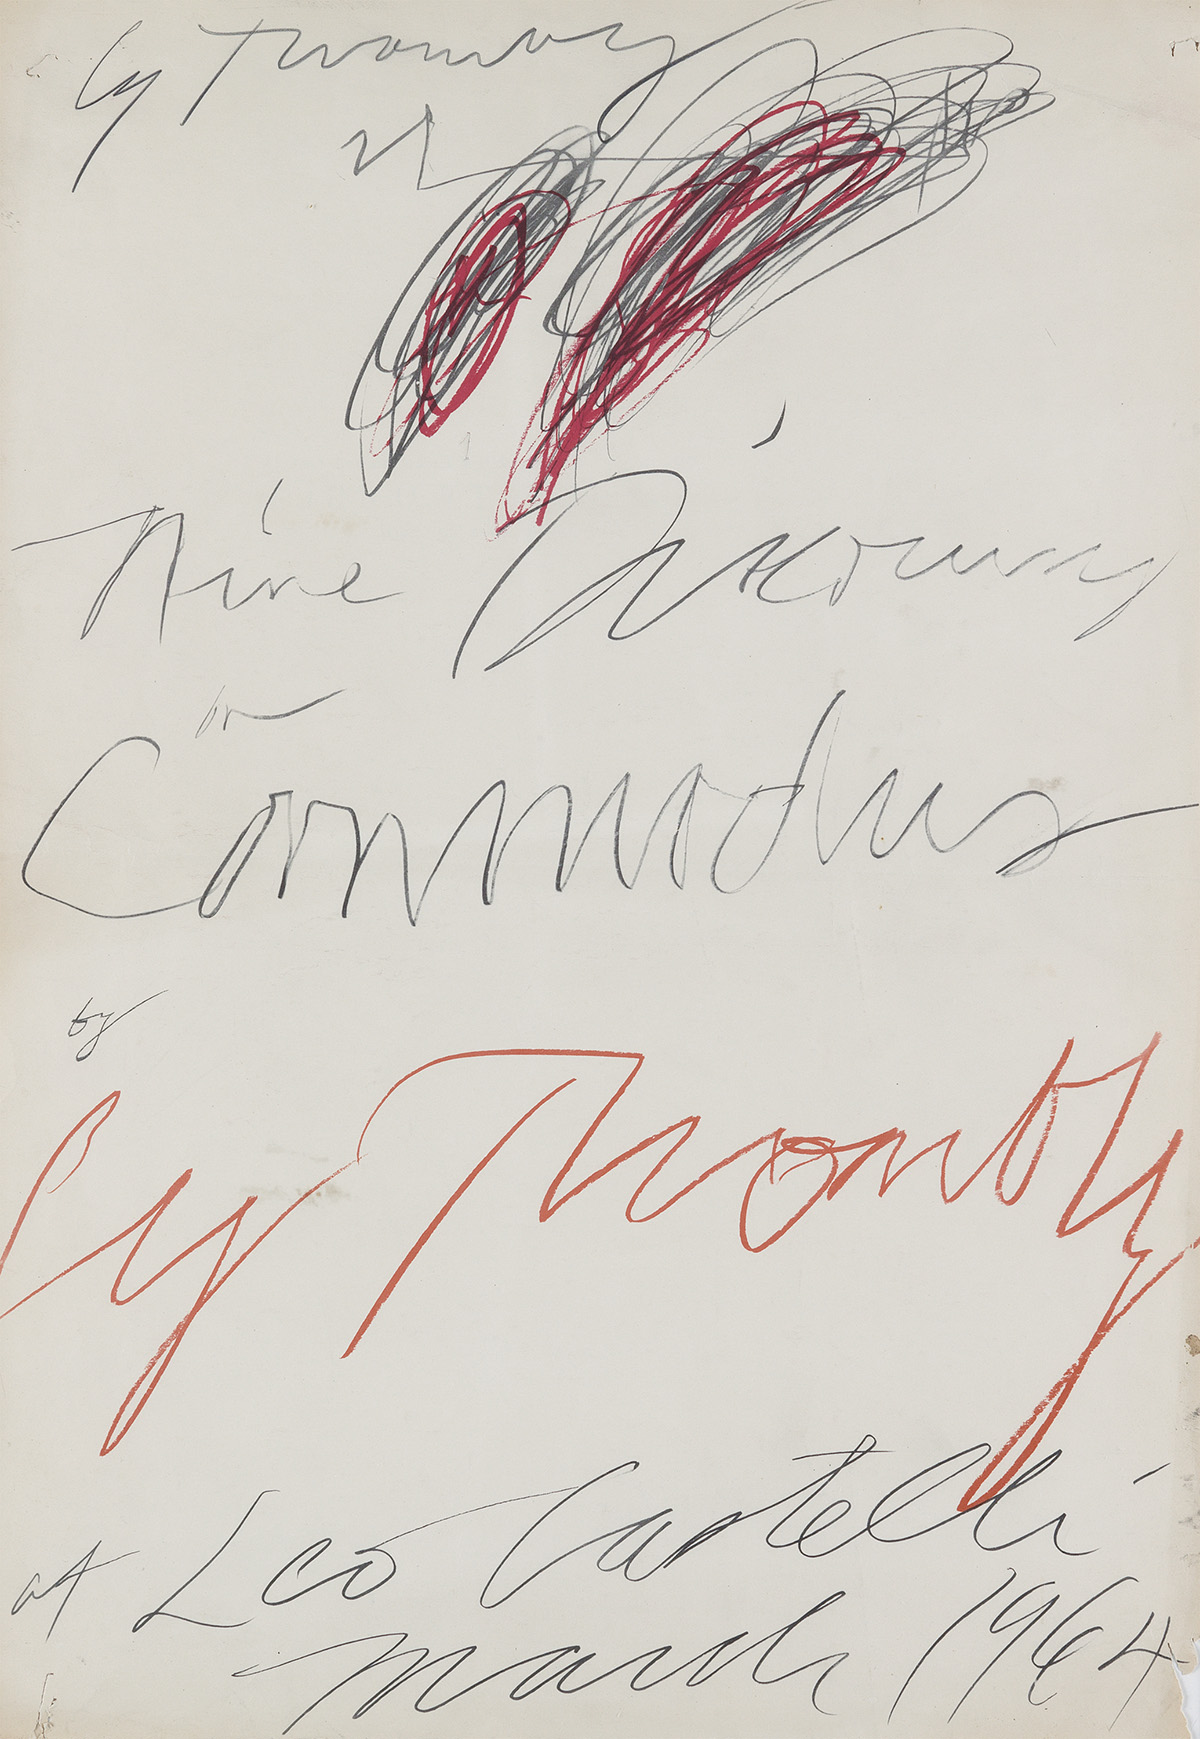 CY TWOMBLY (after) Nine Discourses on Commodus by Cy Twombly at Leo Castelli, 1964